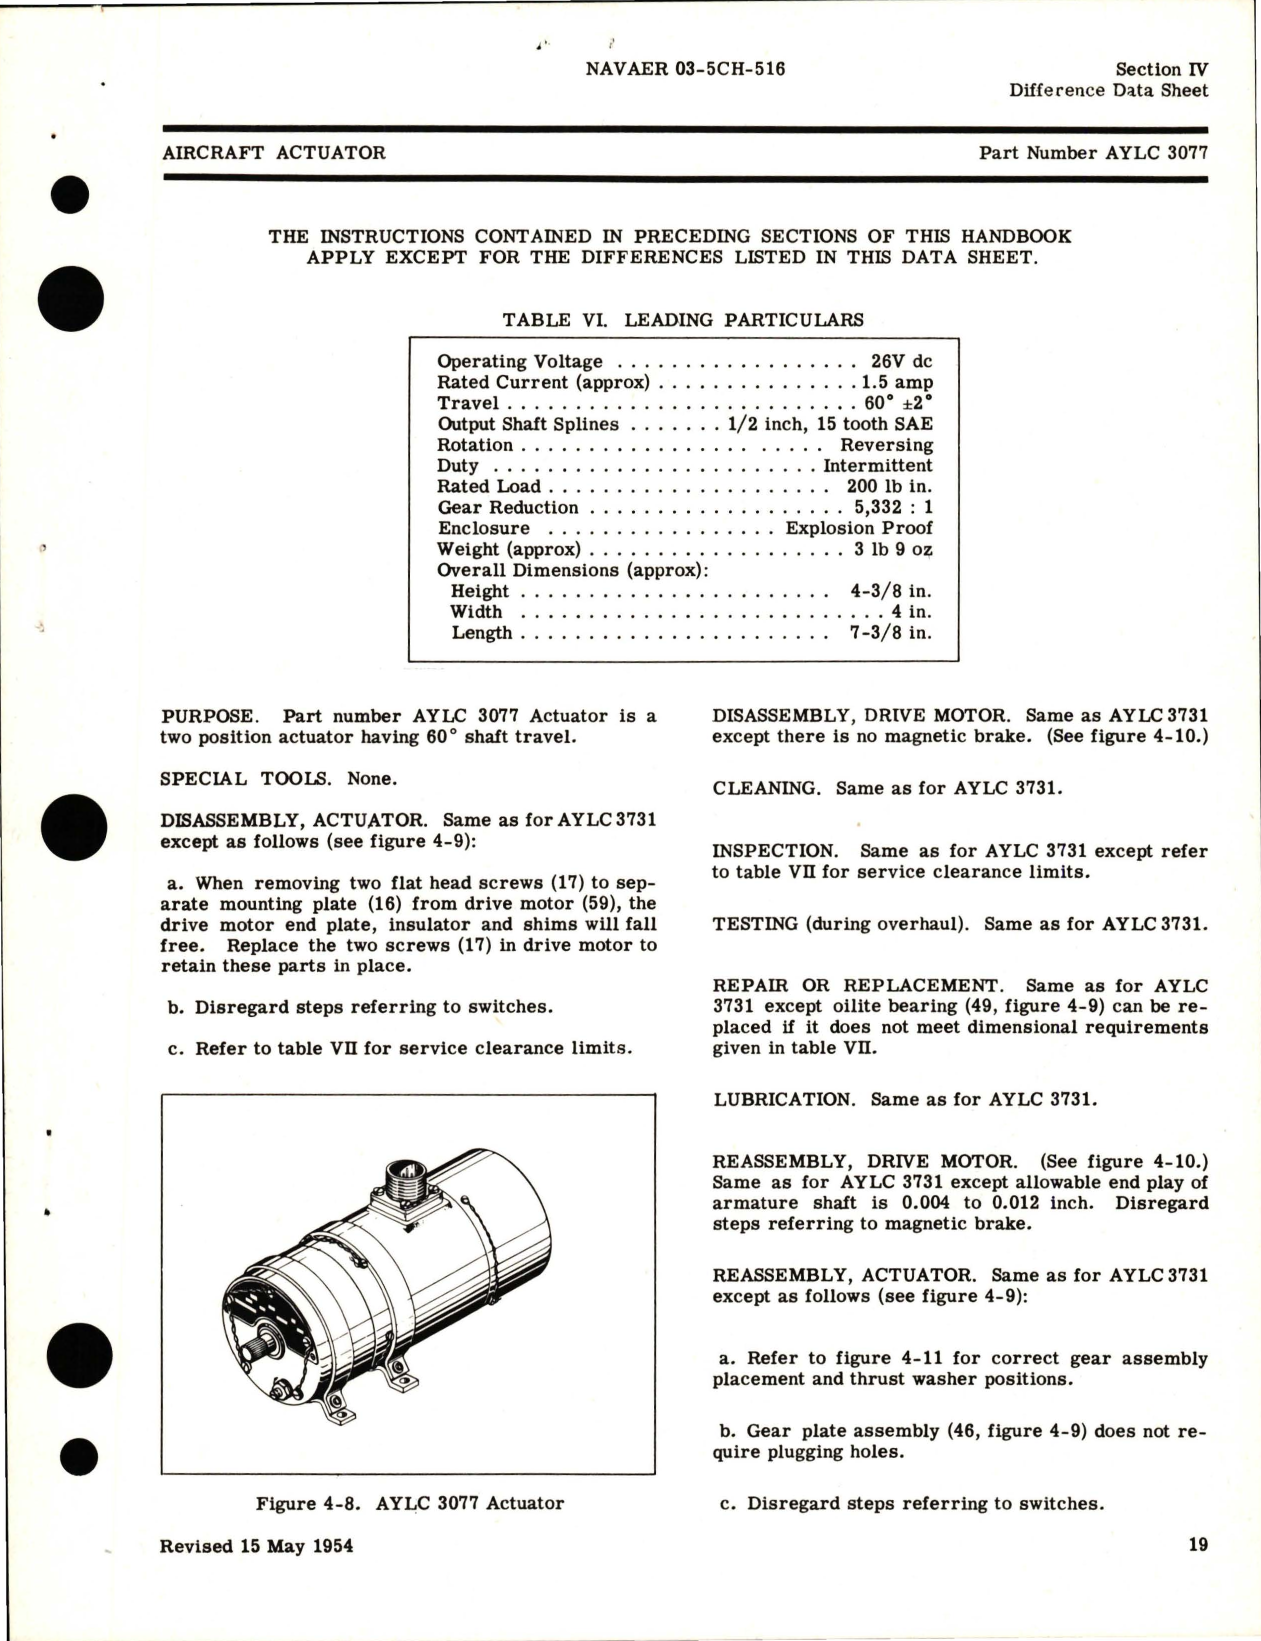 Sample page 5 from AirCorps Library document: Overhaul Instructions for Actuators - Parts AYLC 3731, AYLC 2557, and AYLC 3077